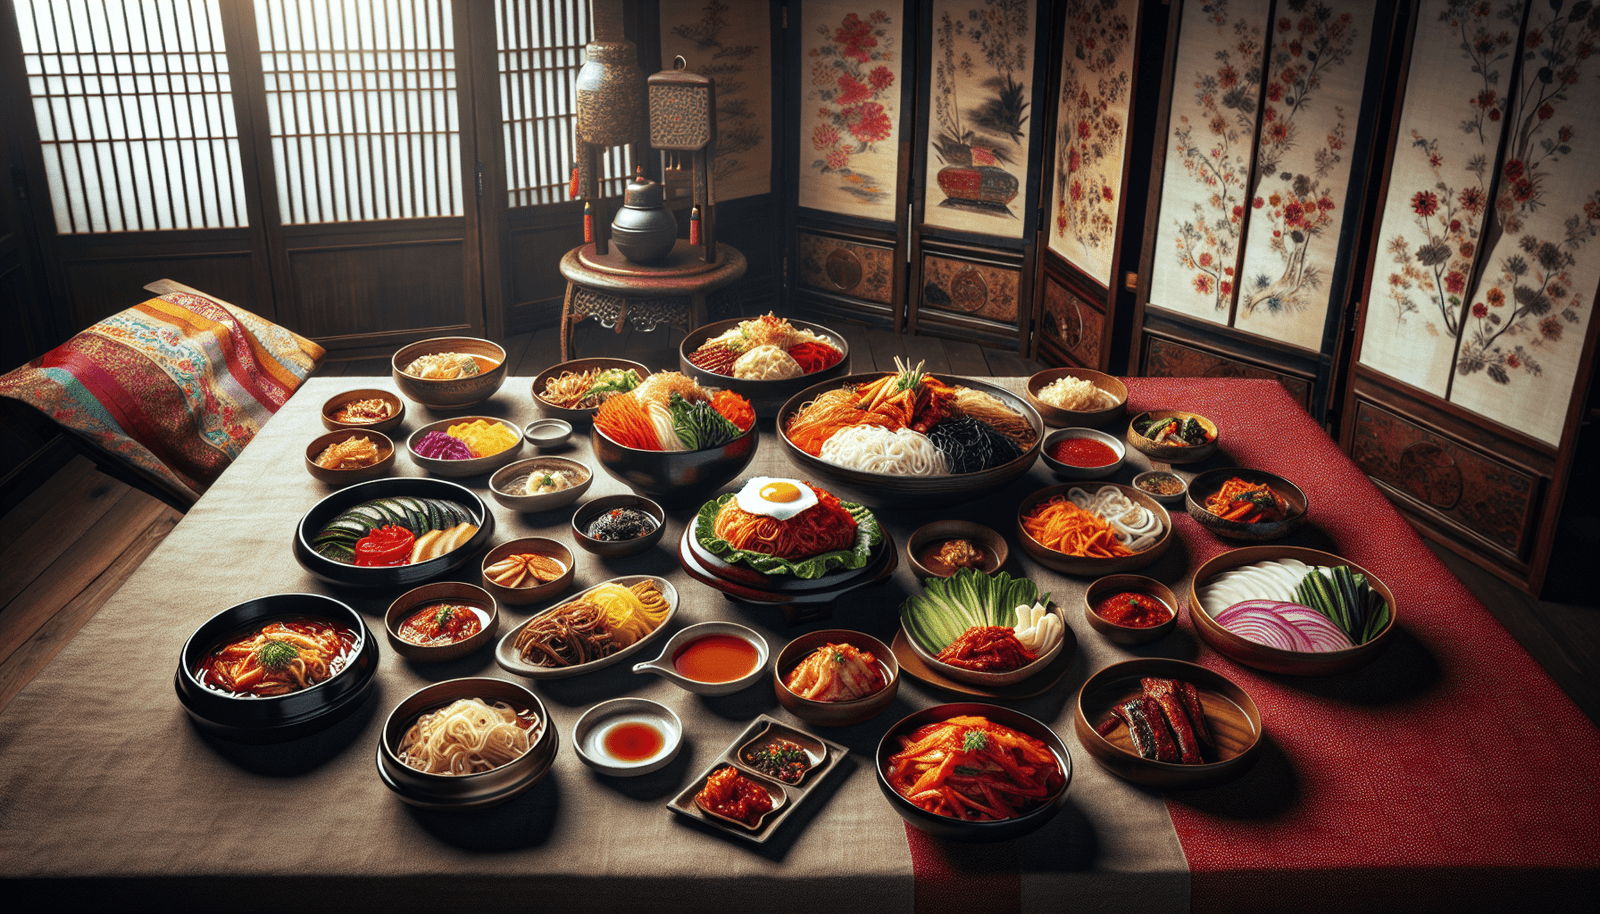 Can You Recommend Traditional Korean Dishes That Are Suitable For A Hanjeongsik (full-course Meal)?